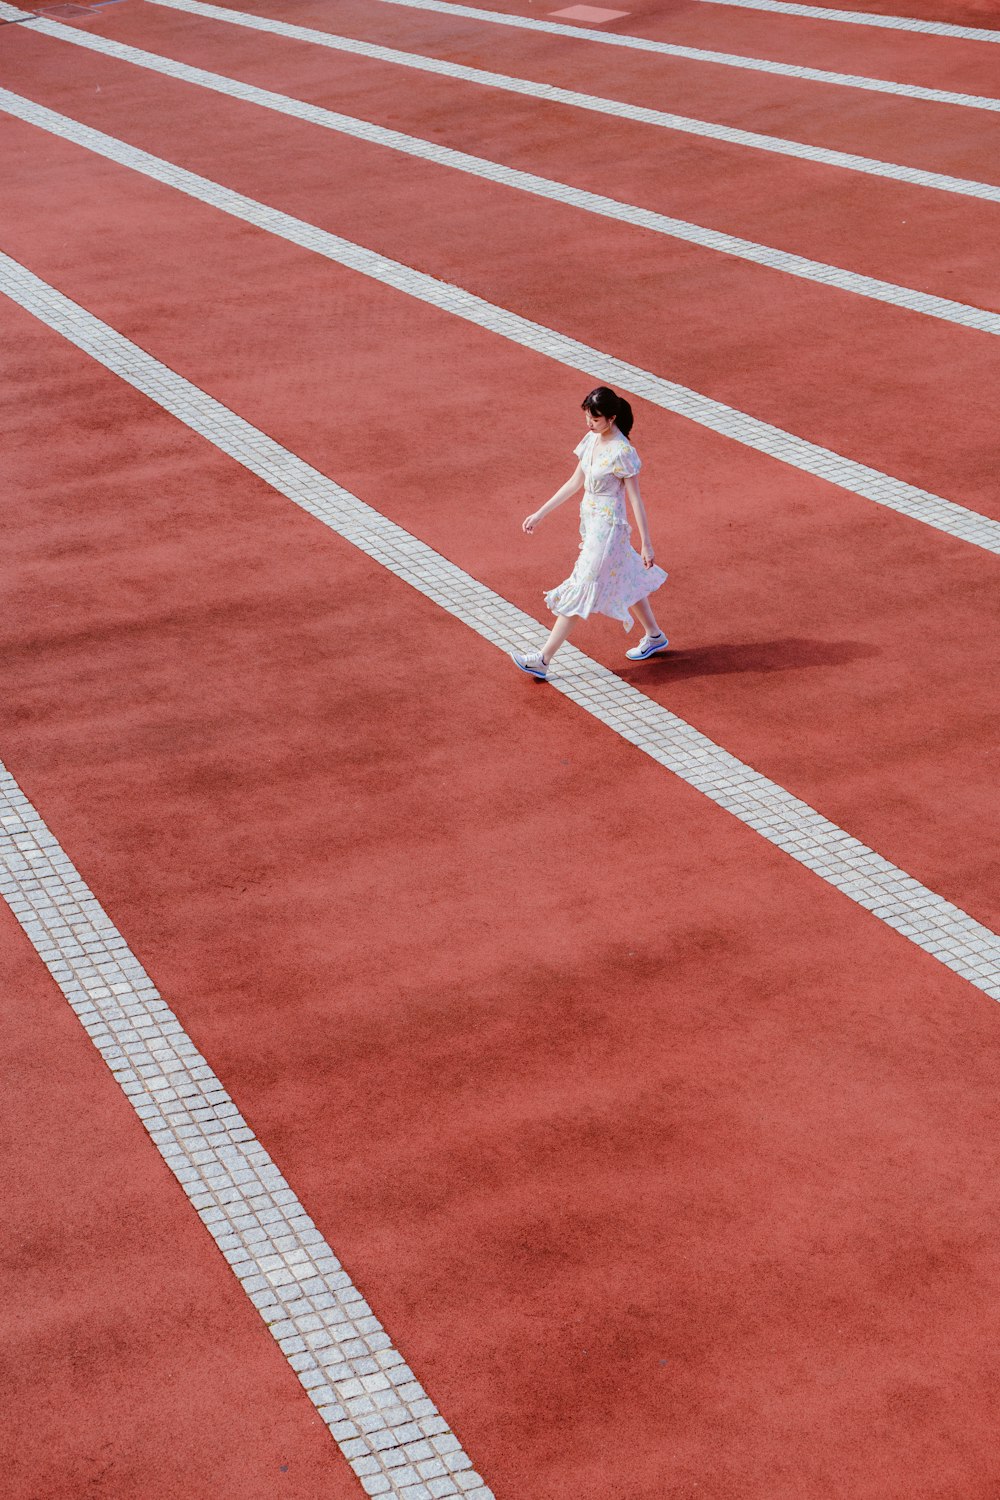 woman in white dress walking on track and field